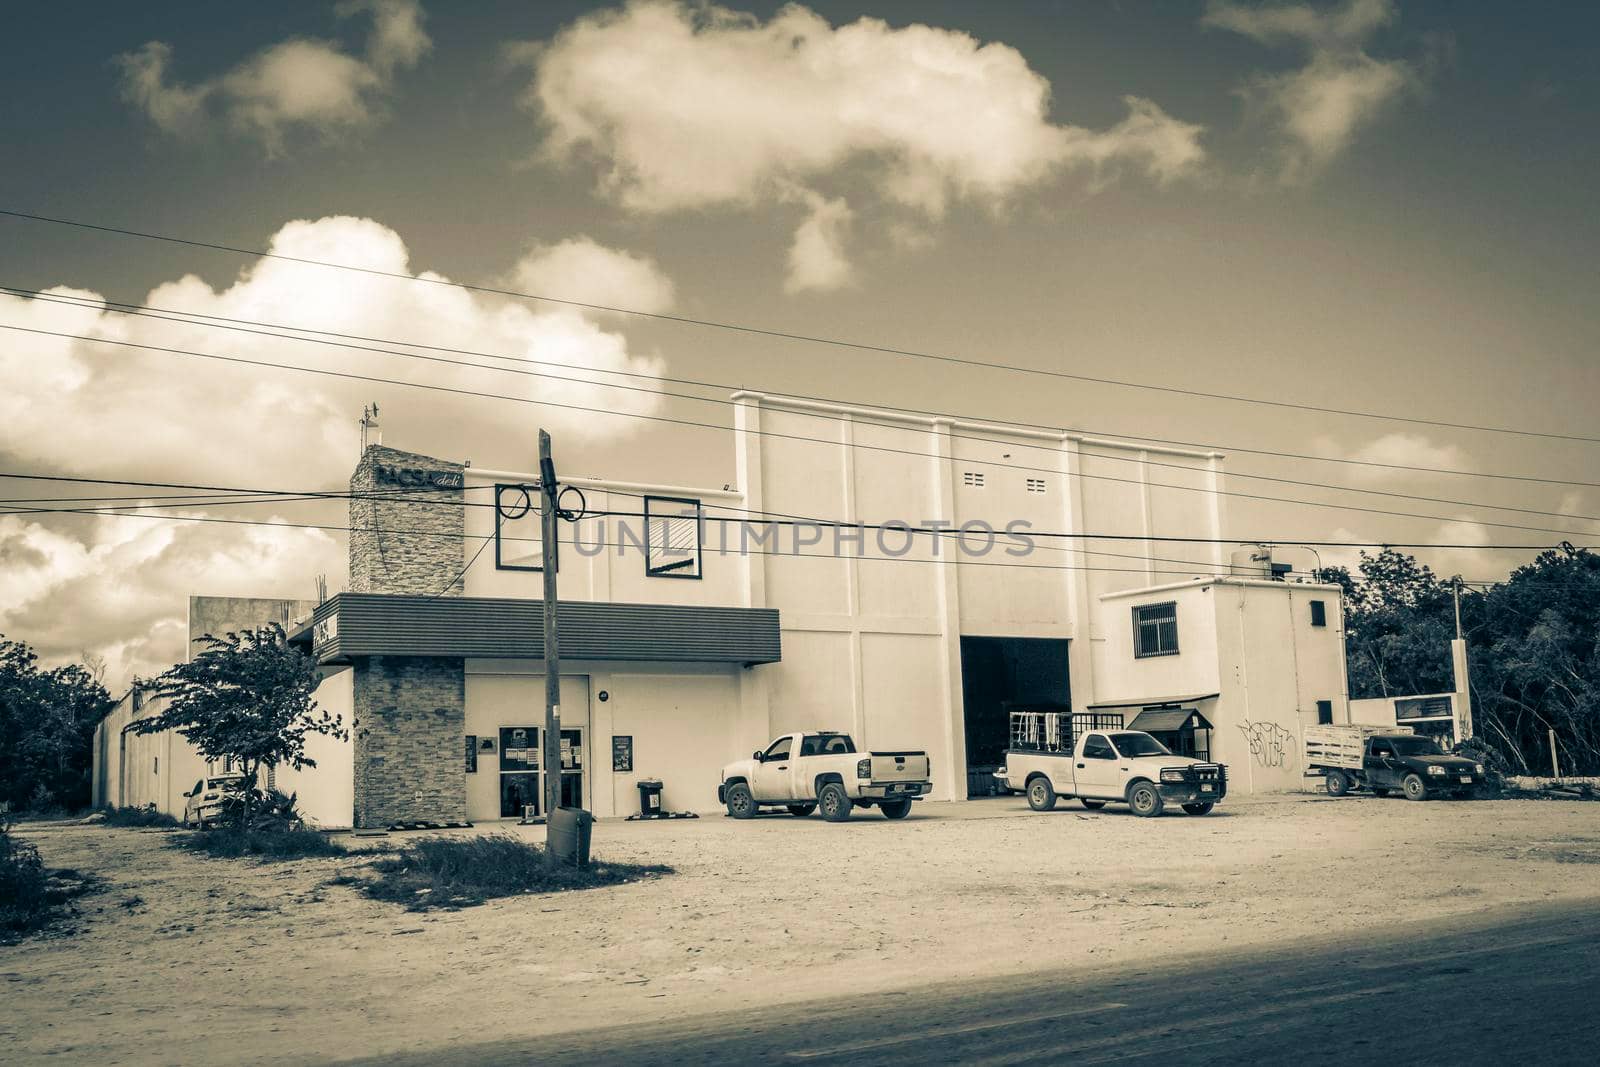 Tulum Mexico 02. February 2022 Old black and white picture of driving thru typical colorful street road and cityscape with cars traffic palm trees bars and restaurants of Tulum in Mexico.